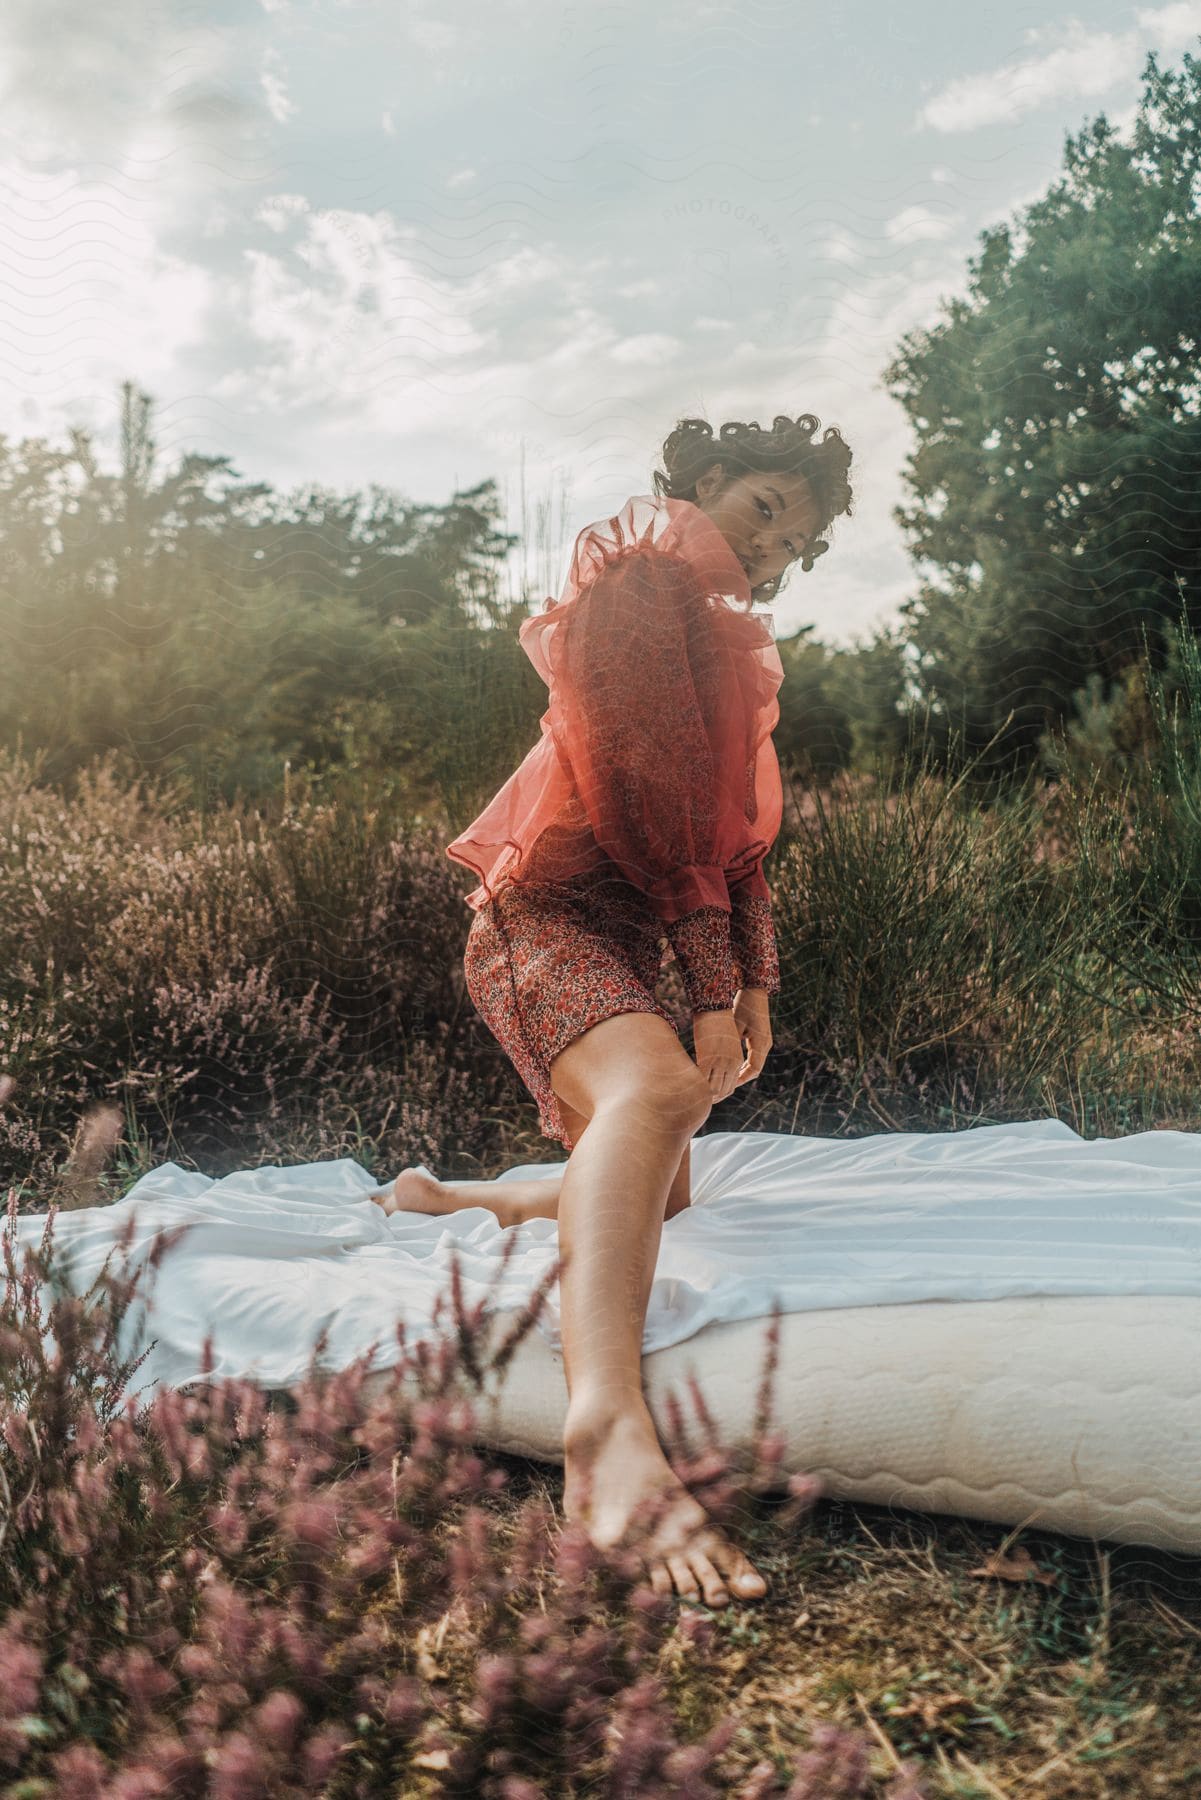 A woman modeling clothing in nature on a blow up mattress with  a white sheet on it.